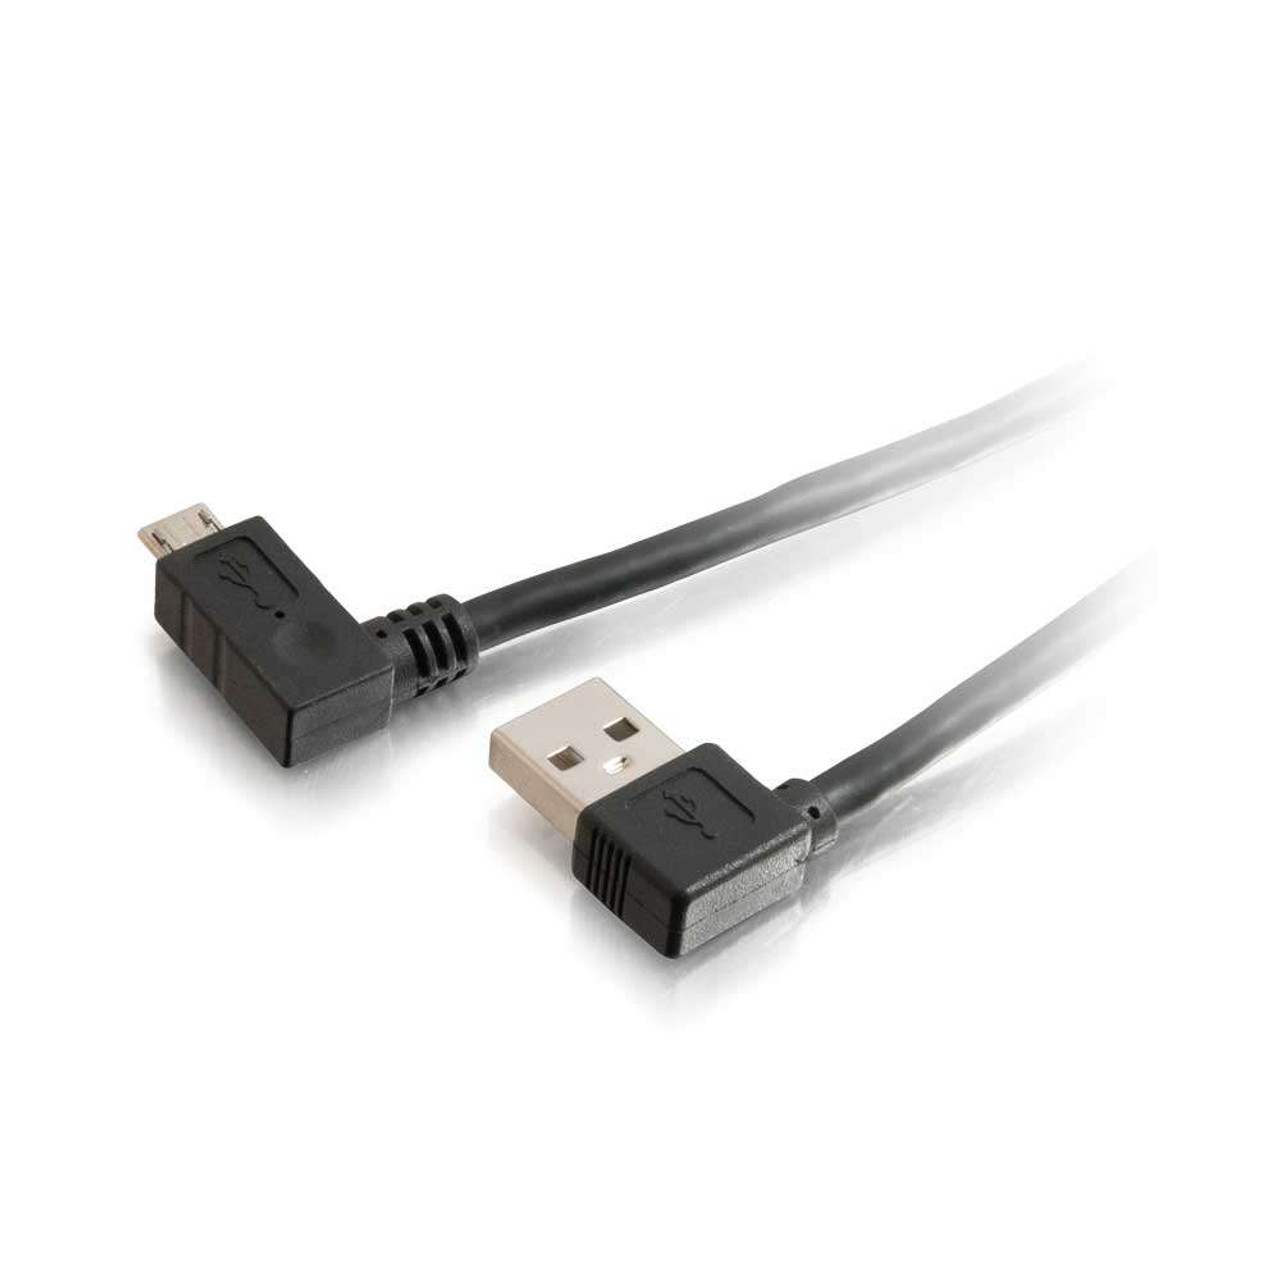 5m Usb 2 0 A Right Angle Male To Micro Usb B Right Angle Male Cable Av Cables